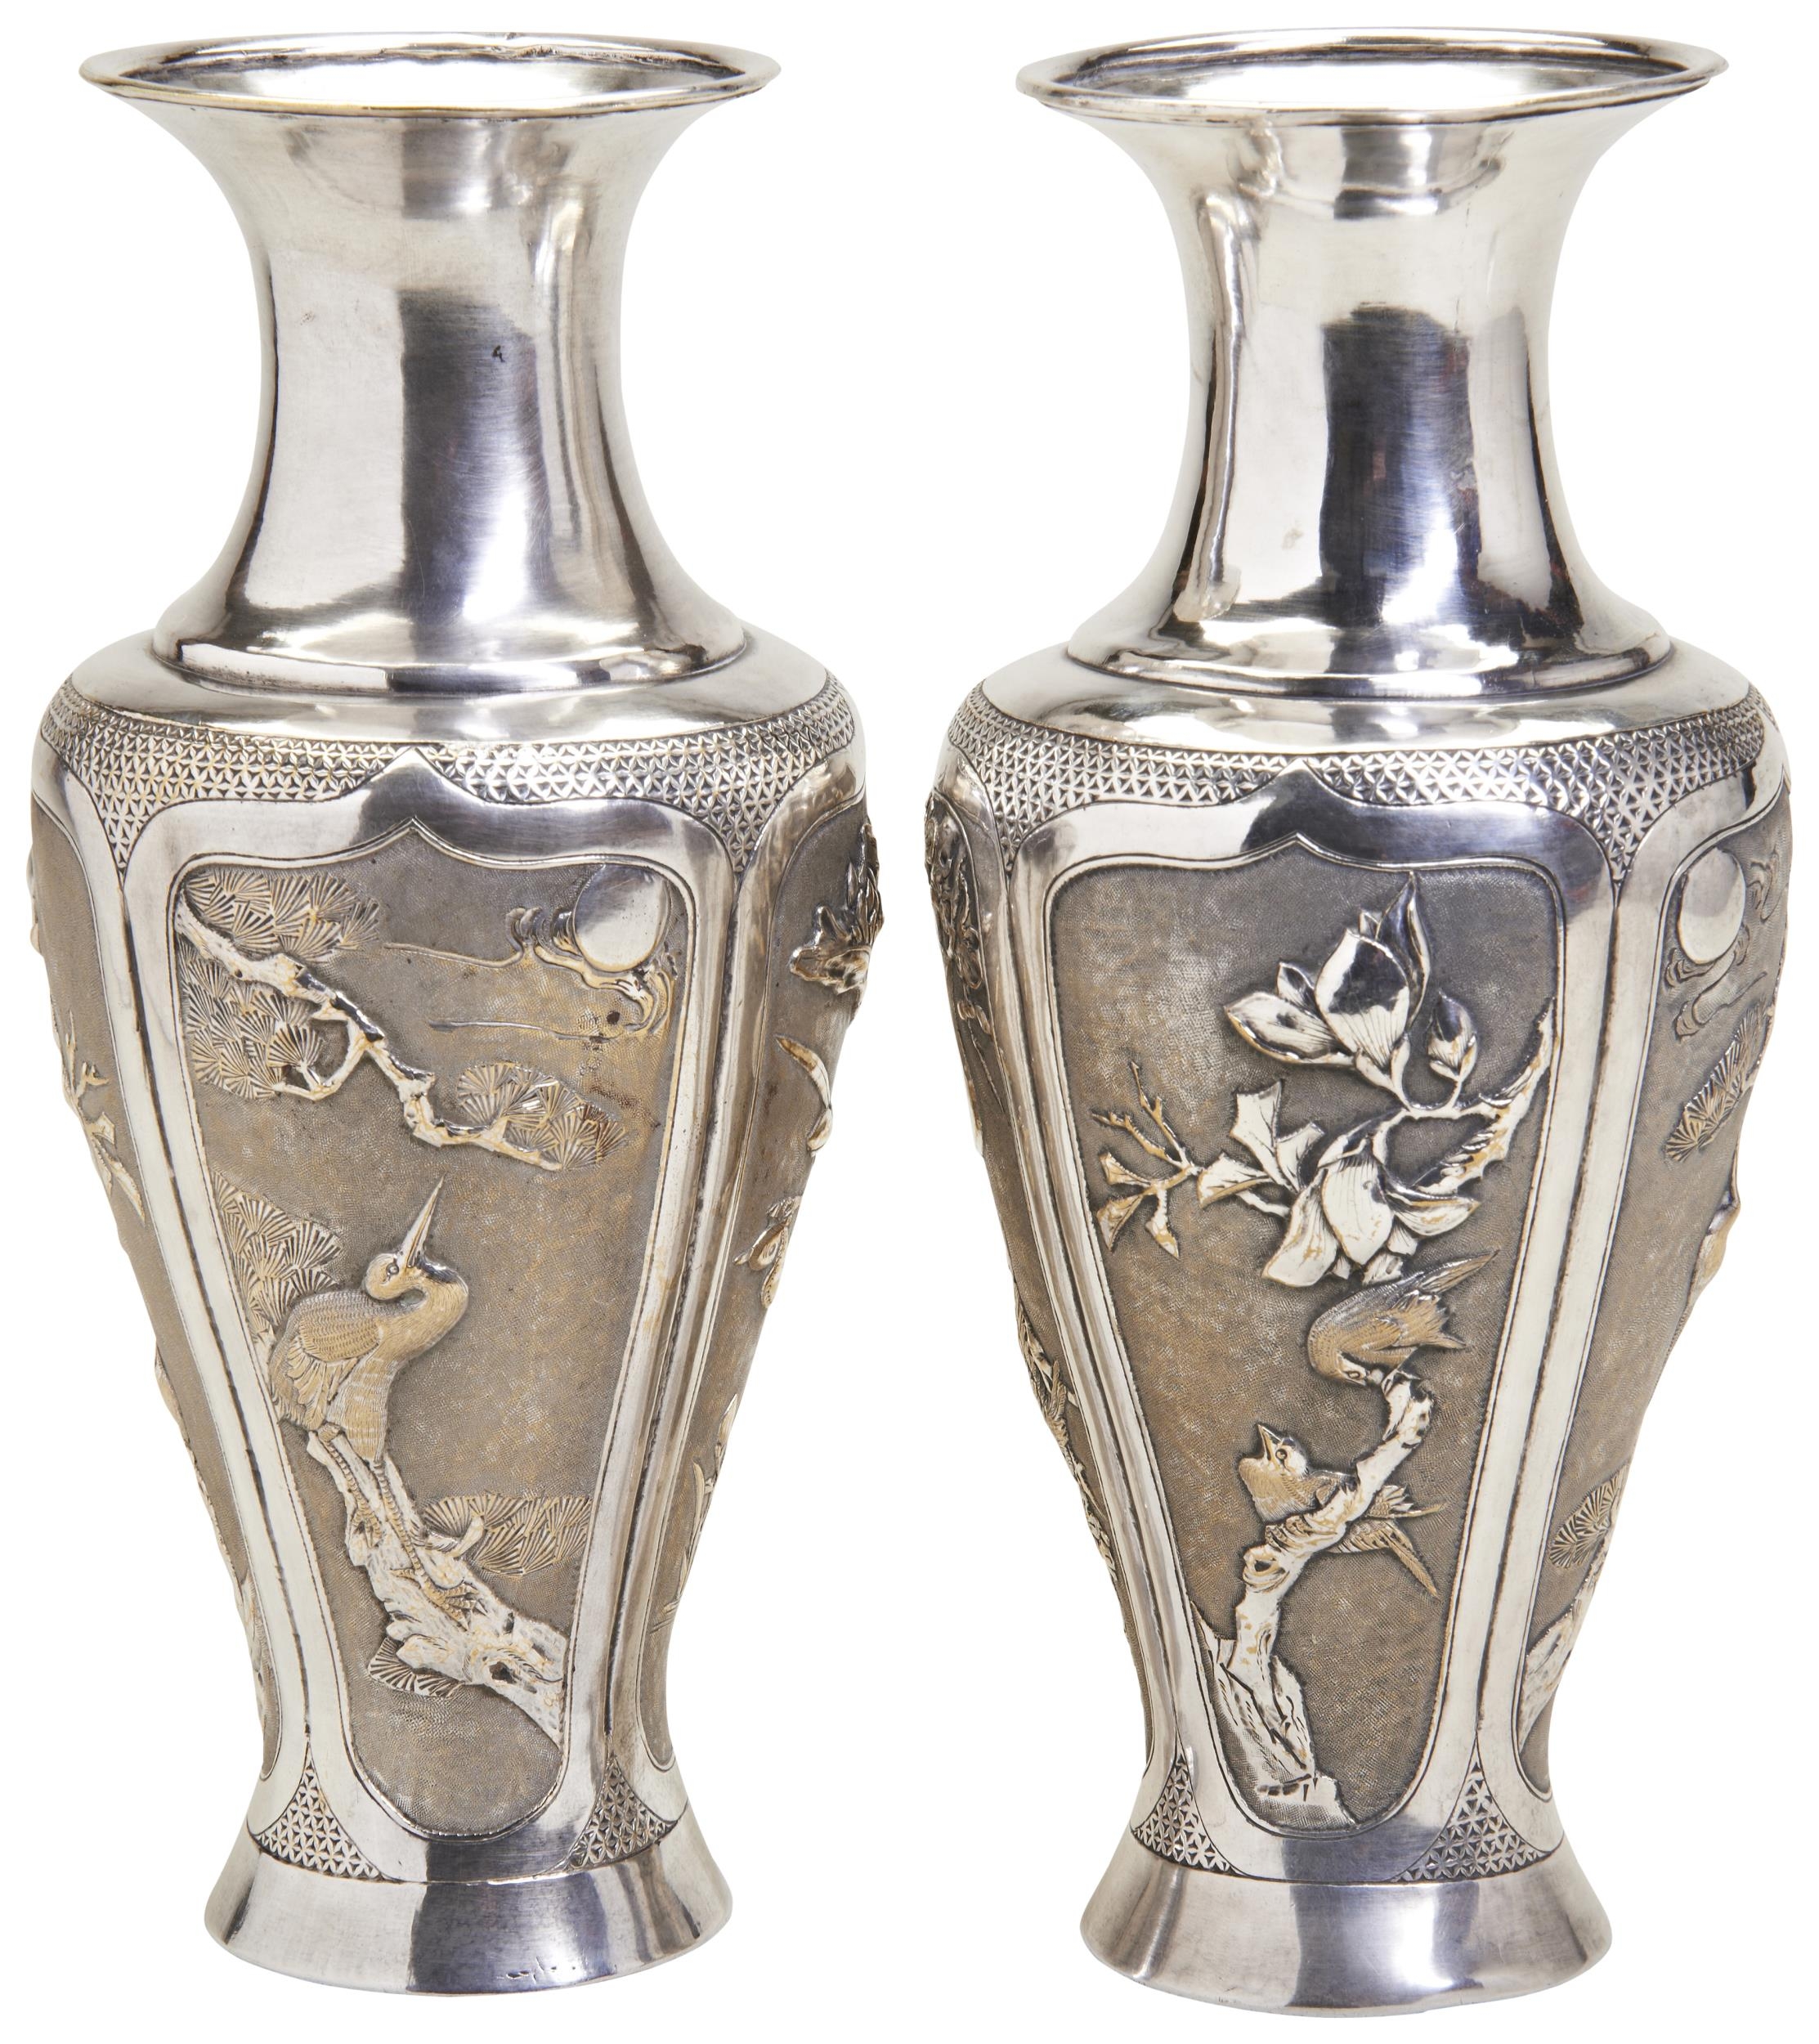 A PAIR OF CHINESE SILVERED-METAL VASES LATE QING DYNASTY of baluster form, the sides decorated in